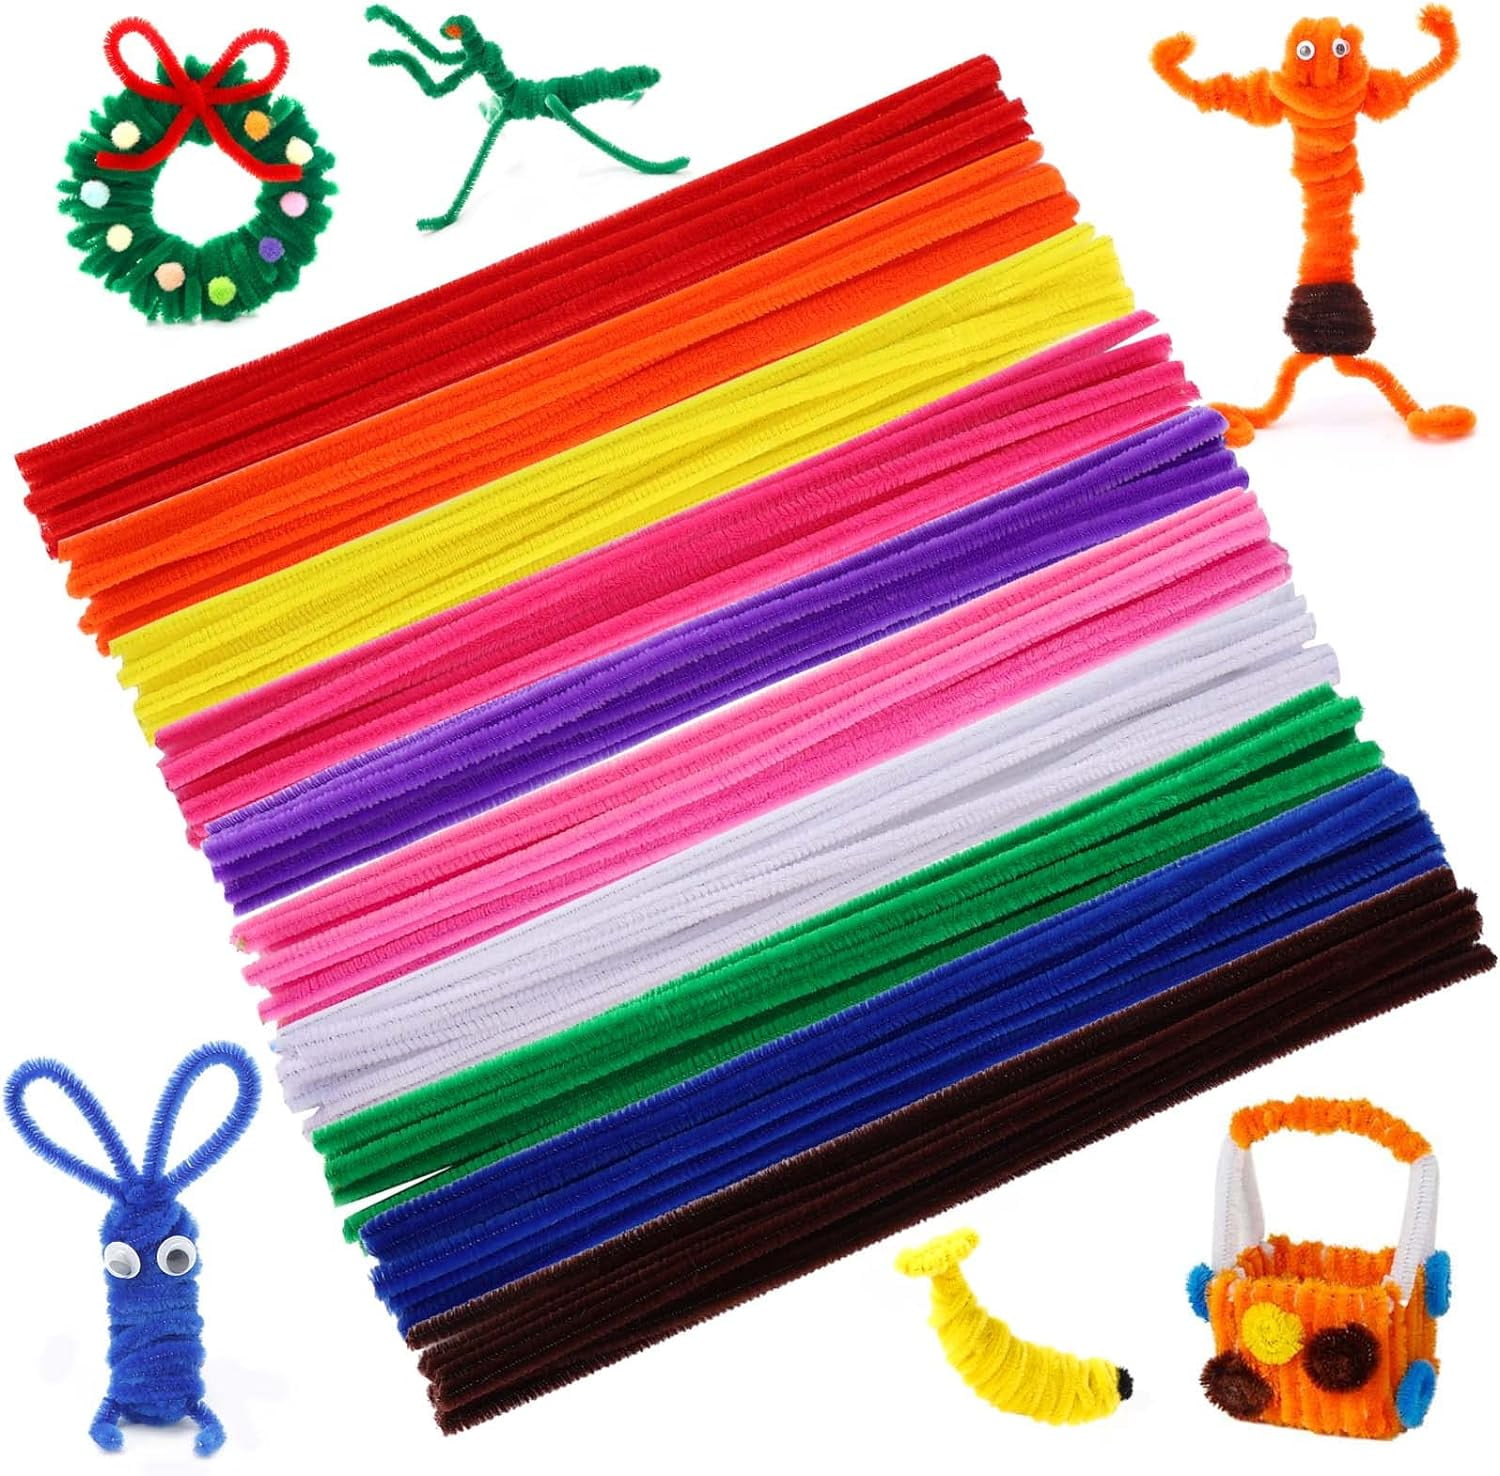 Red Pipe Cleaners, 100psc Pipe Cleaners Craft Supplies, Chenille Stems,  Pipe Cleaners for Crafts, Art and Craft Supplies